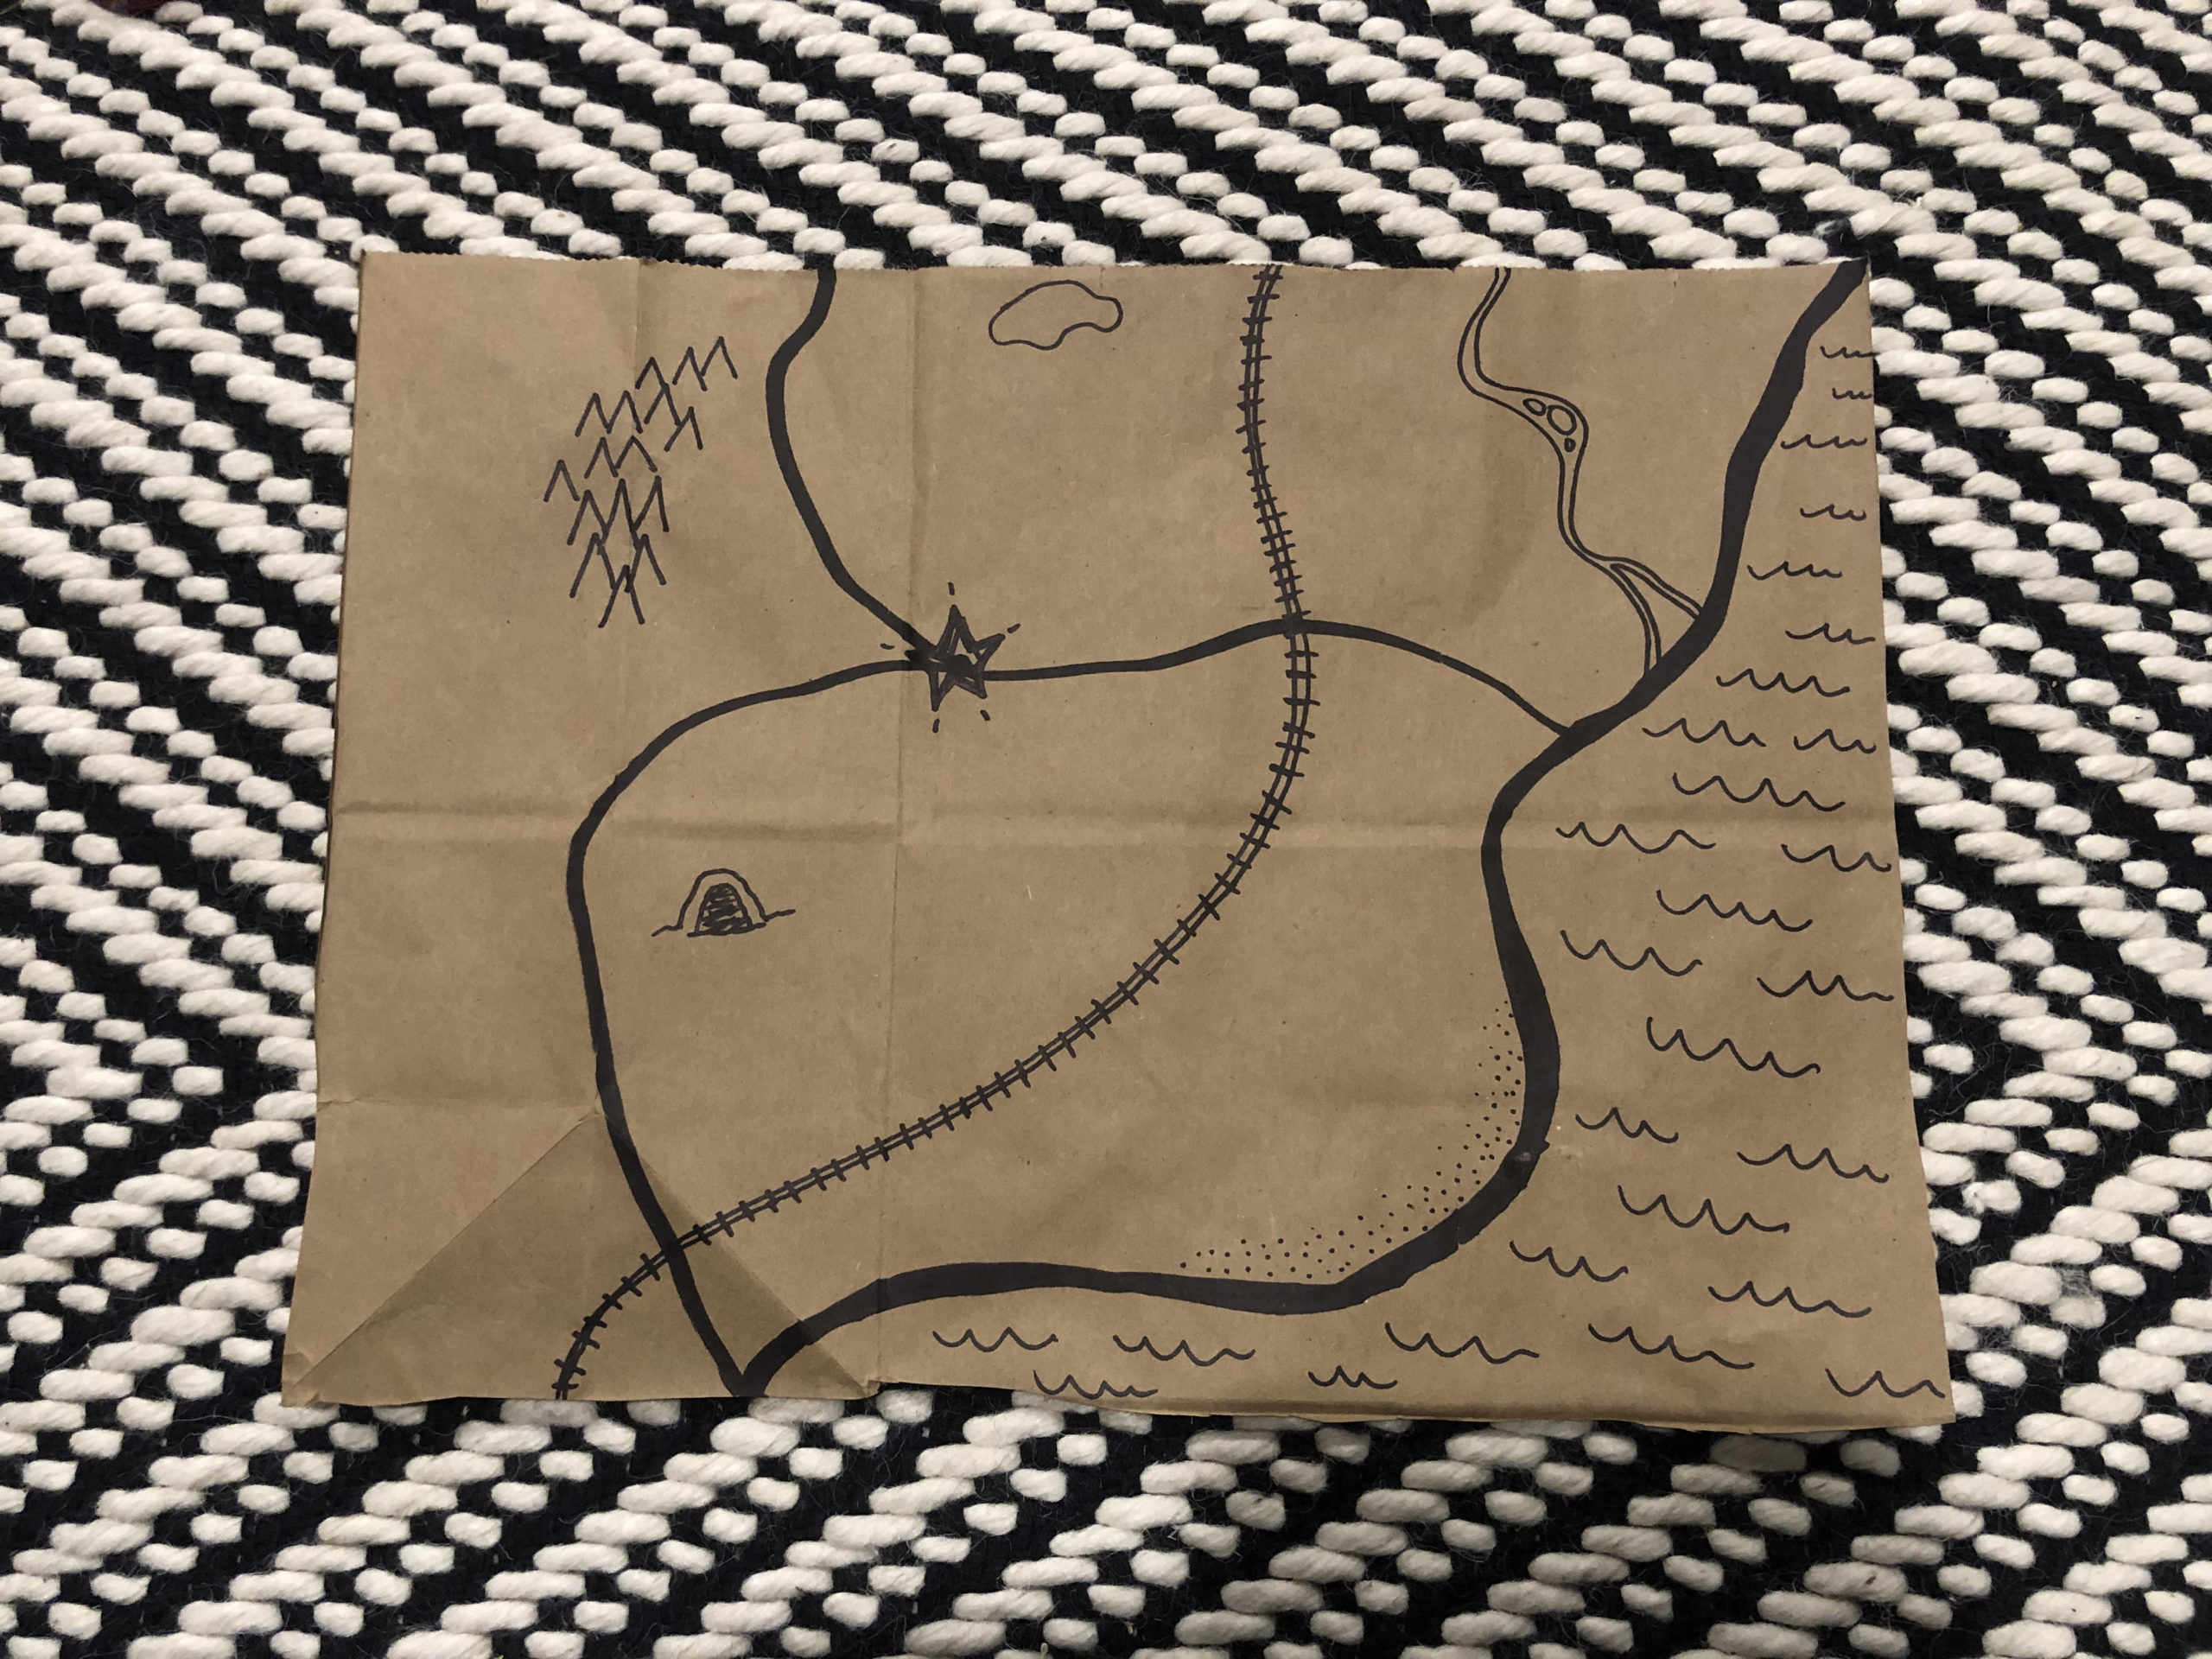 a map drawn in black marker on a brown paper bag with geographical elements drawn in according to the descriptions above